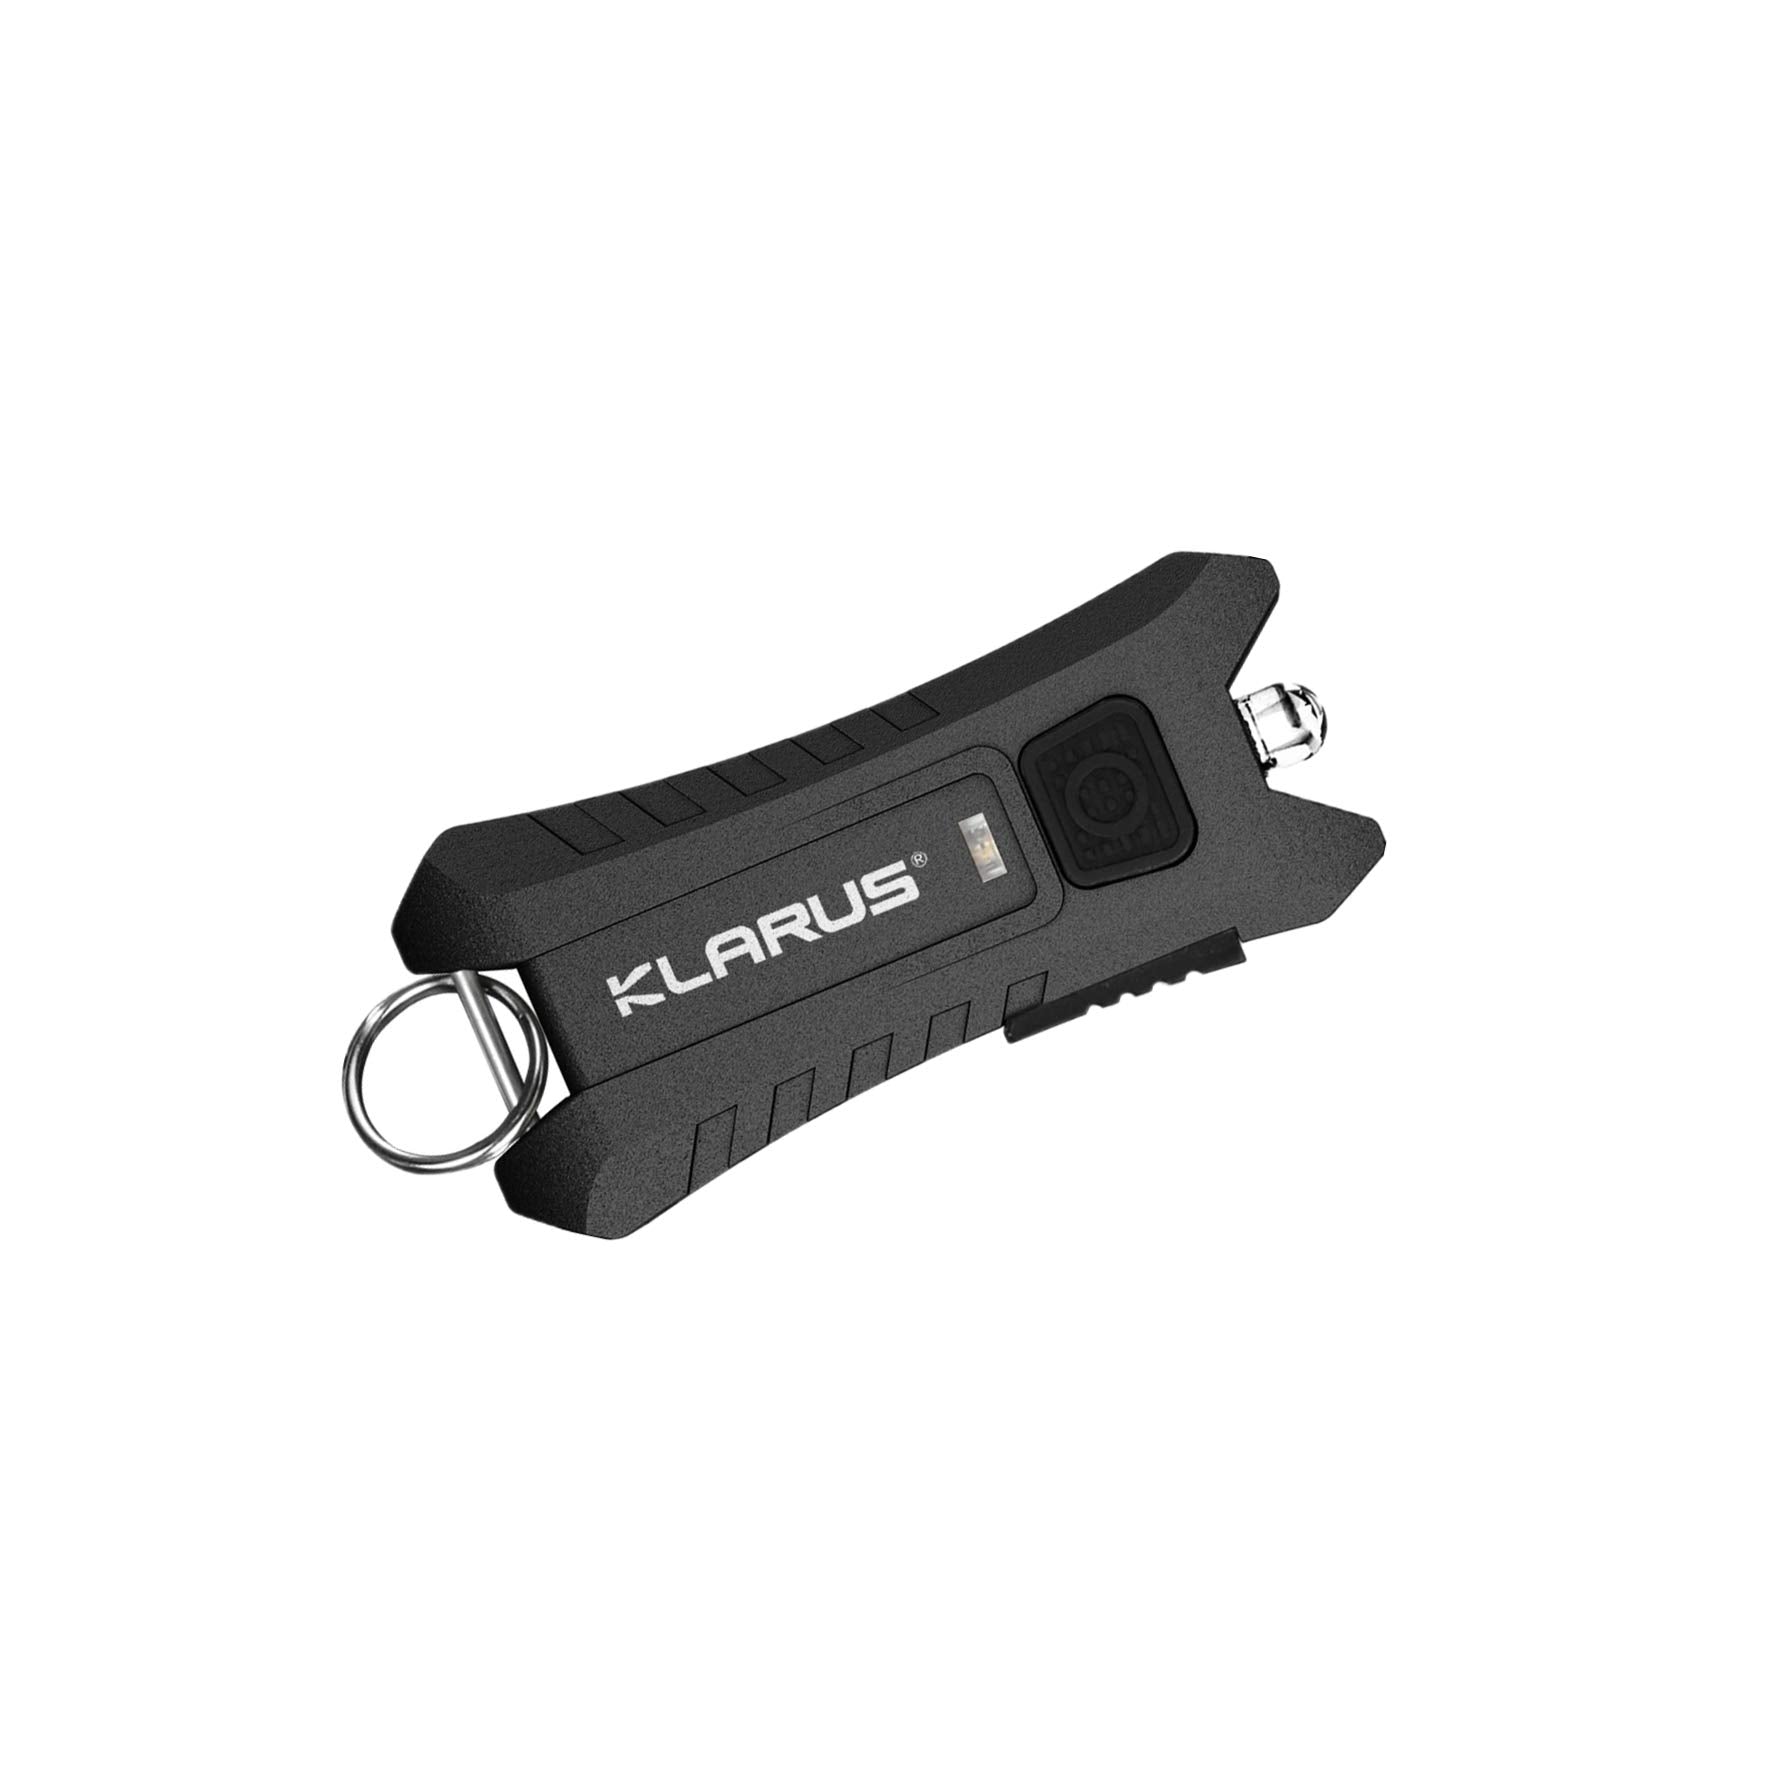 Klarus Mi2 Rechargeable LED Keyring Torch, 40 Lumens Small Lightweight Pocket Keychain Flashlight Powered by Bulid-in Battery